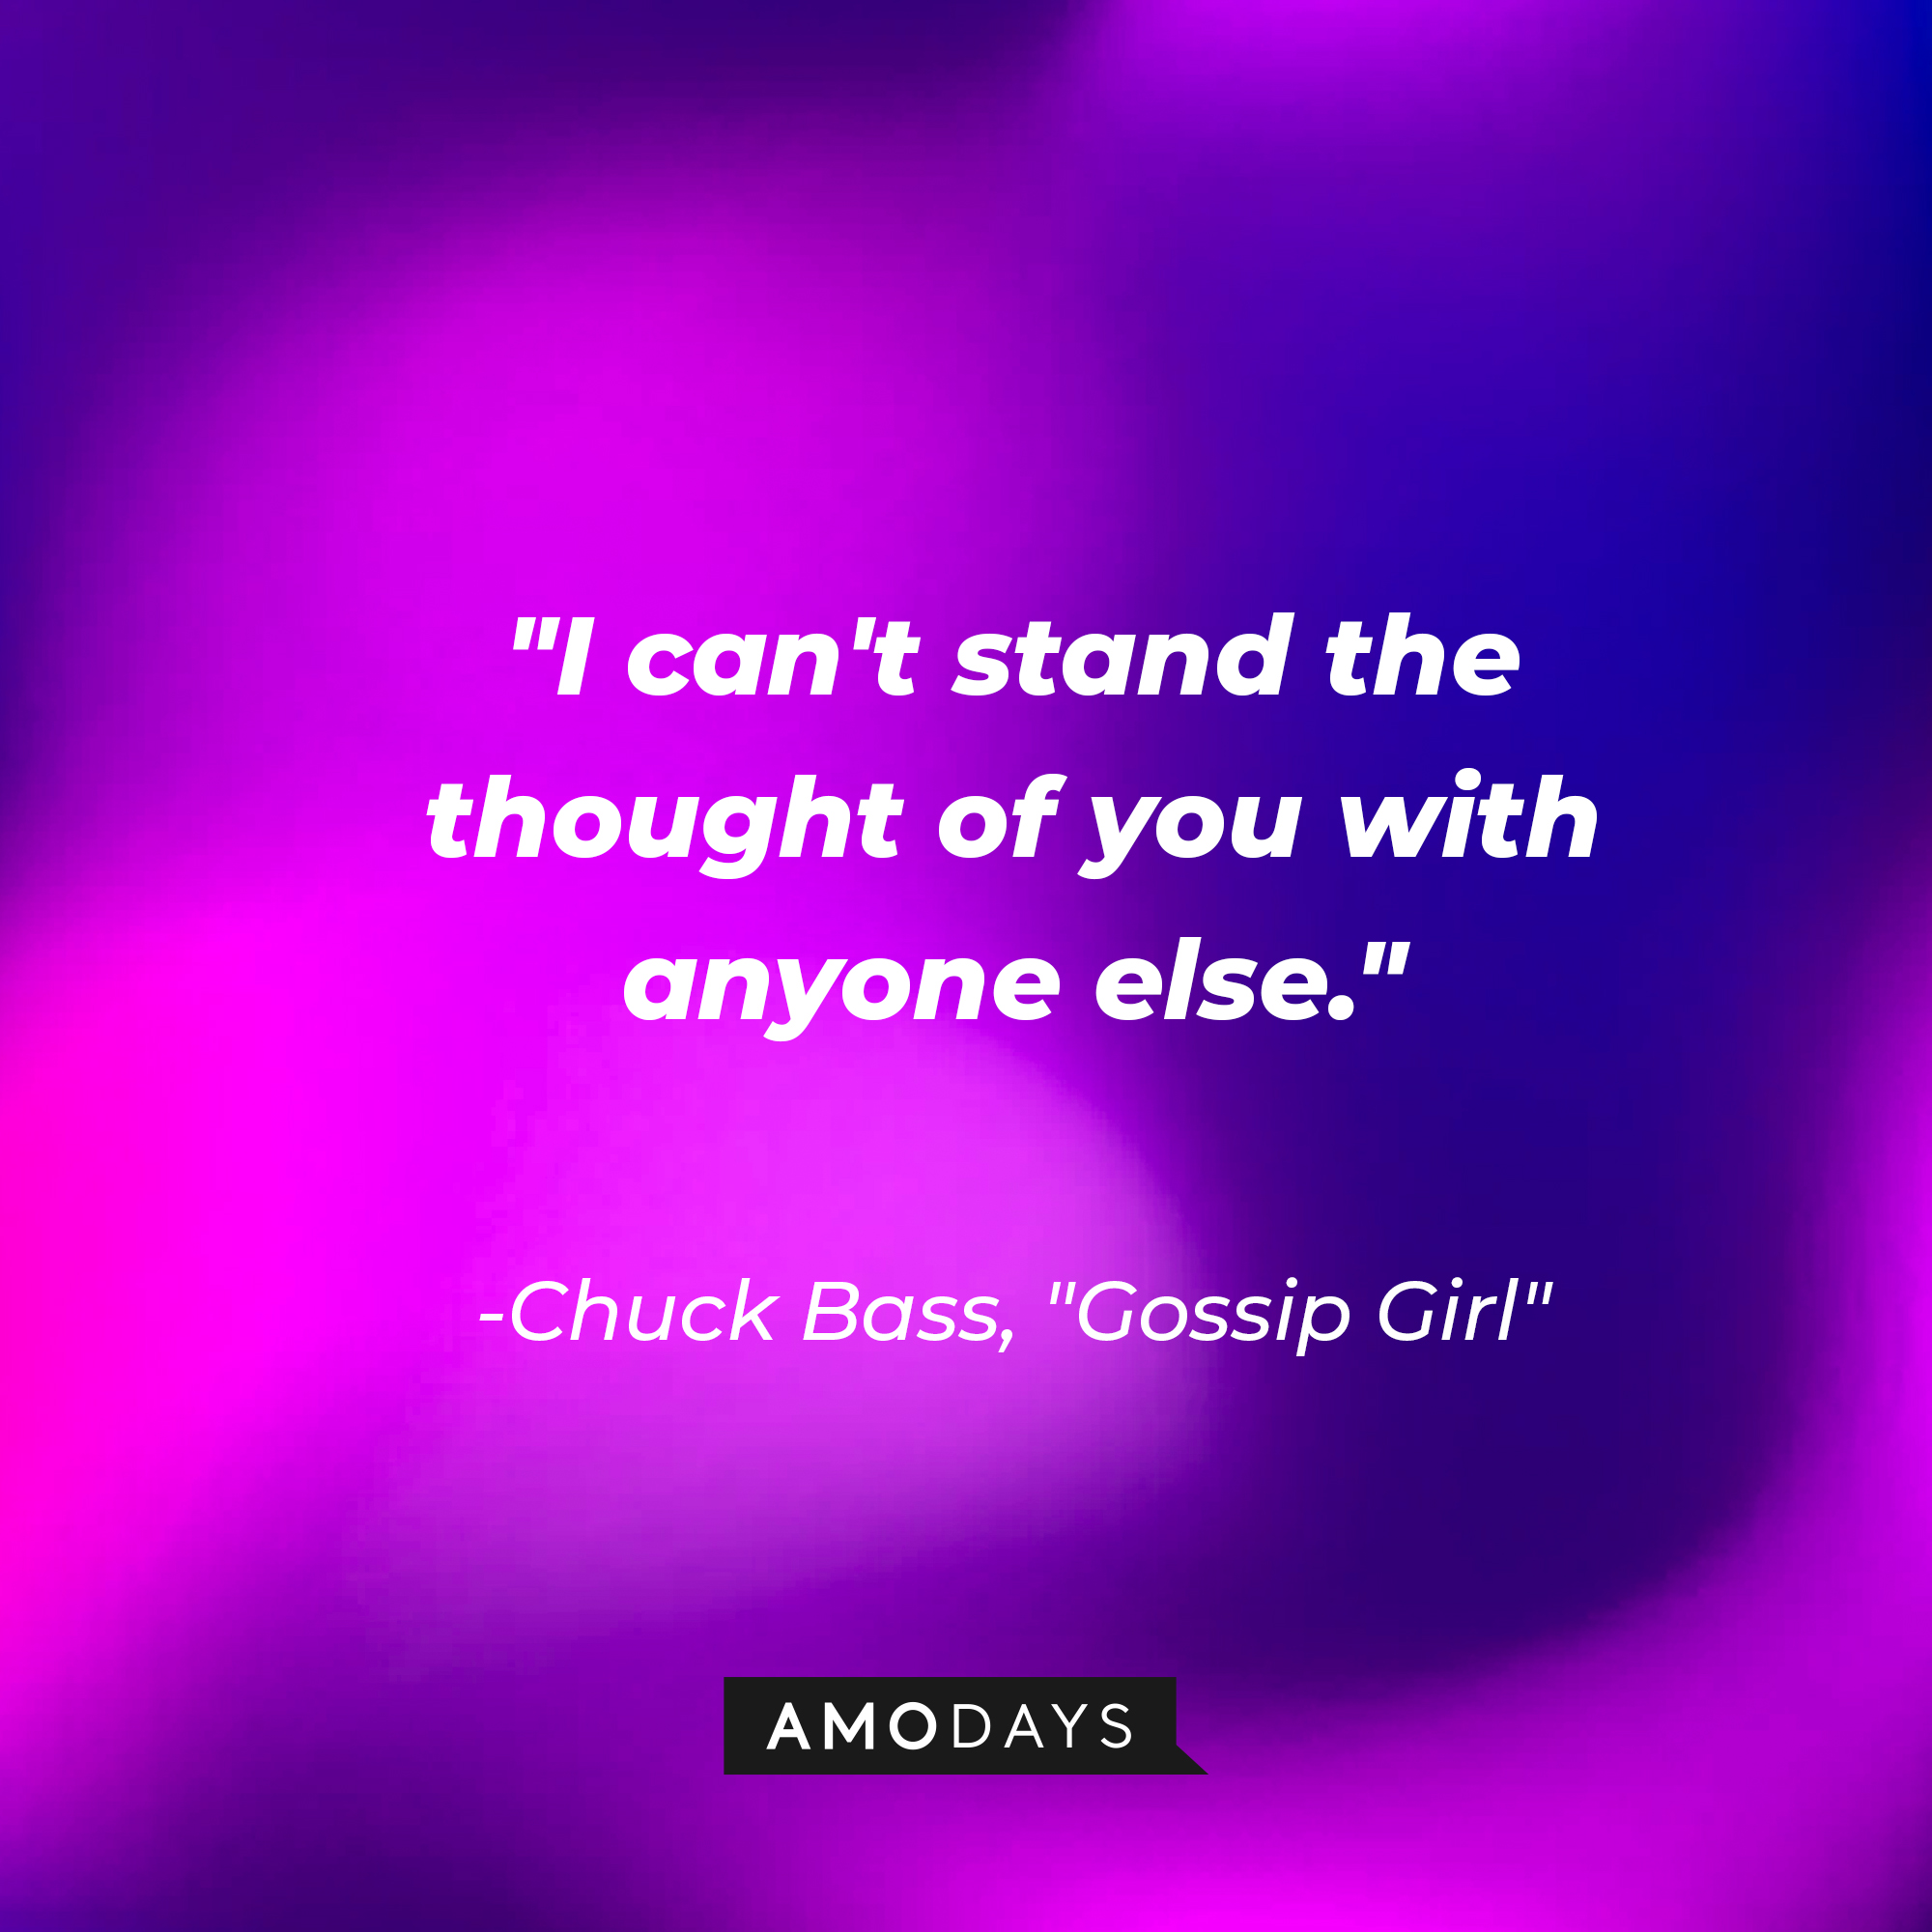 Chuck Bass' quote: "I can't stand the thought of you with anyone else." | Source: AmoDays